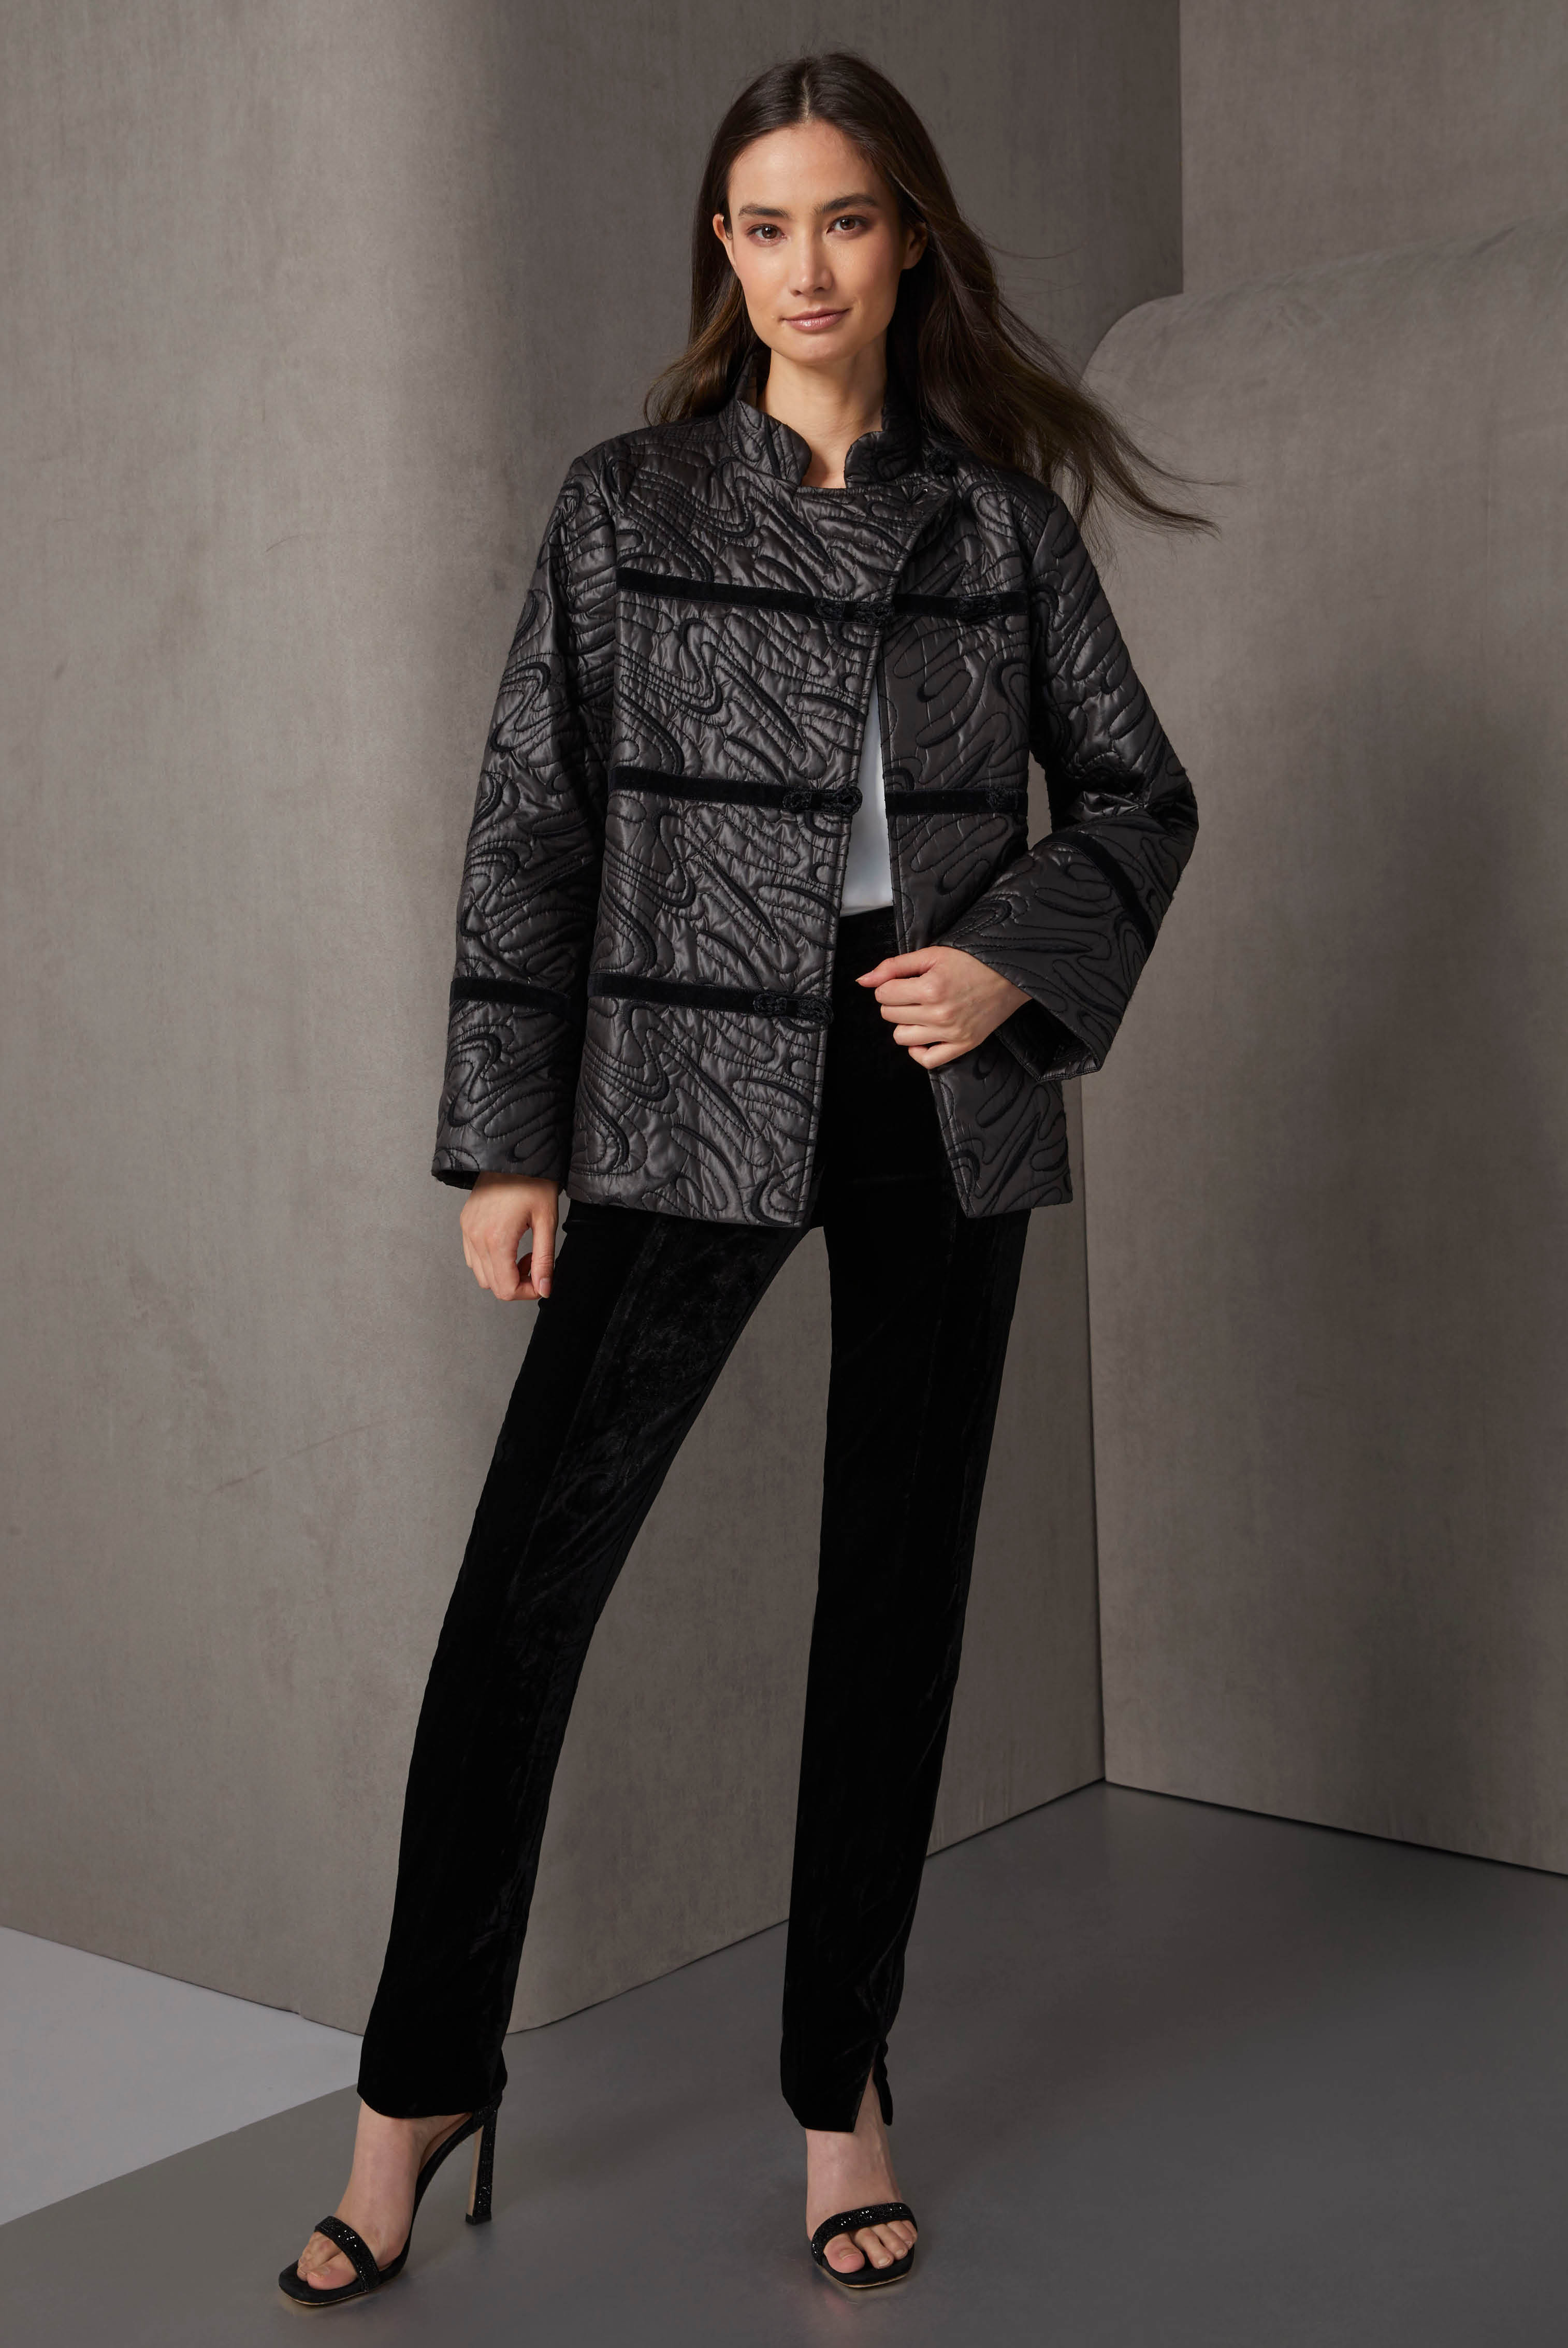 This look is a trend-right column of black with Asian allure in sumptuous materials. The Mandarin jacket features swirling topstitching and embroidery, velvet passementerie, and luxe frog closures.